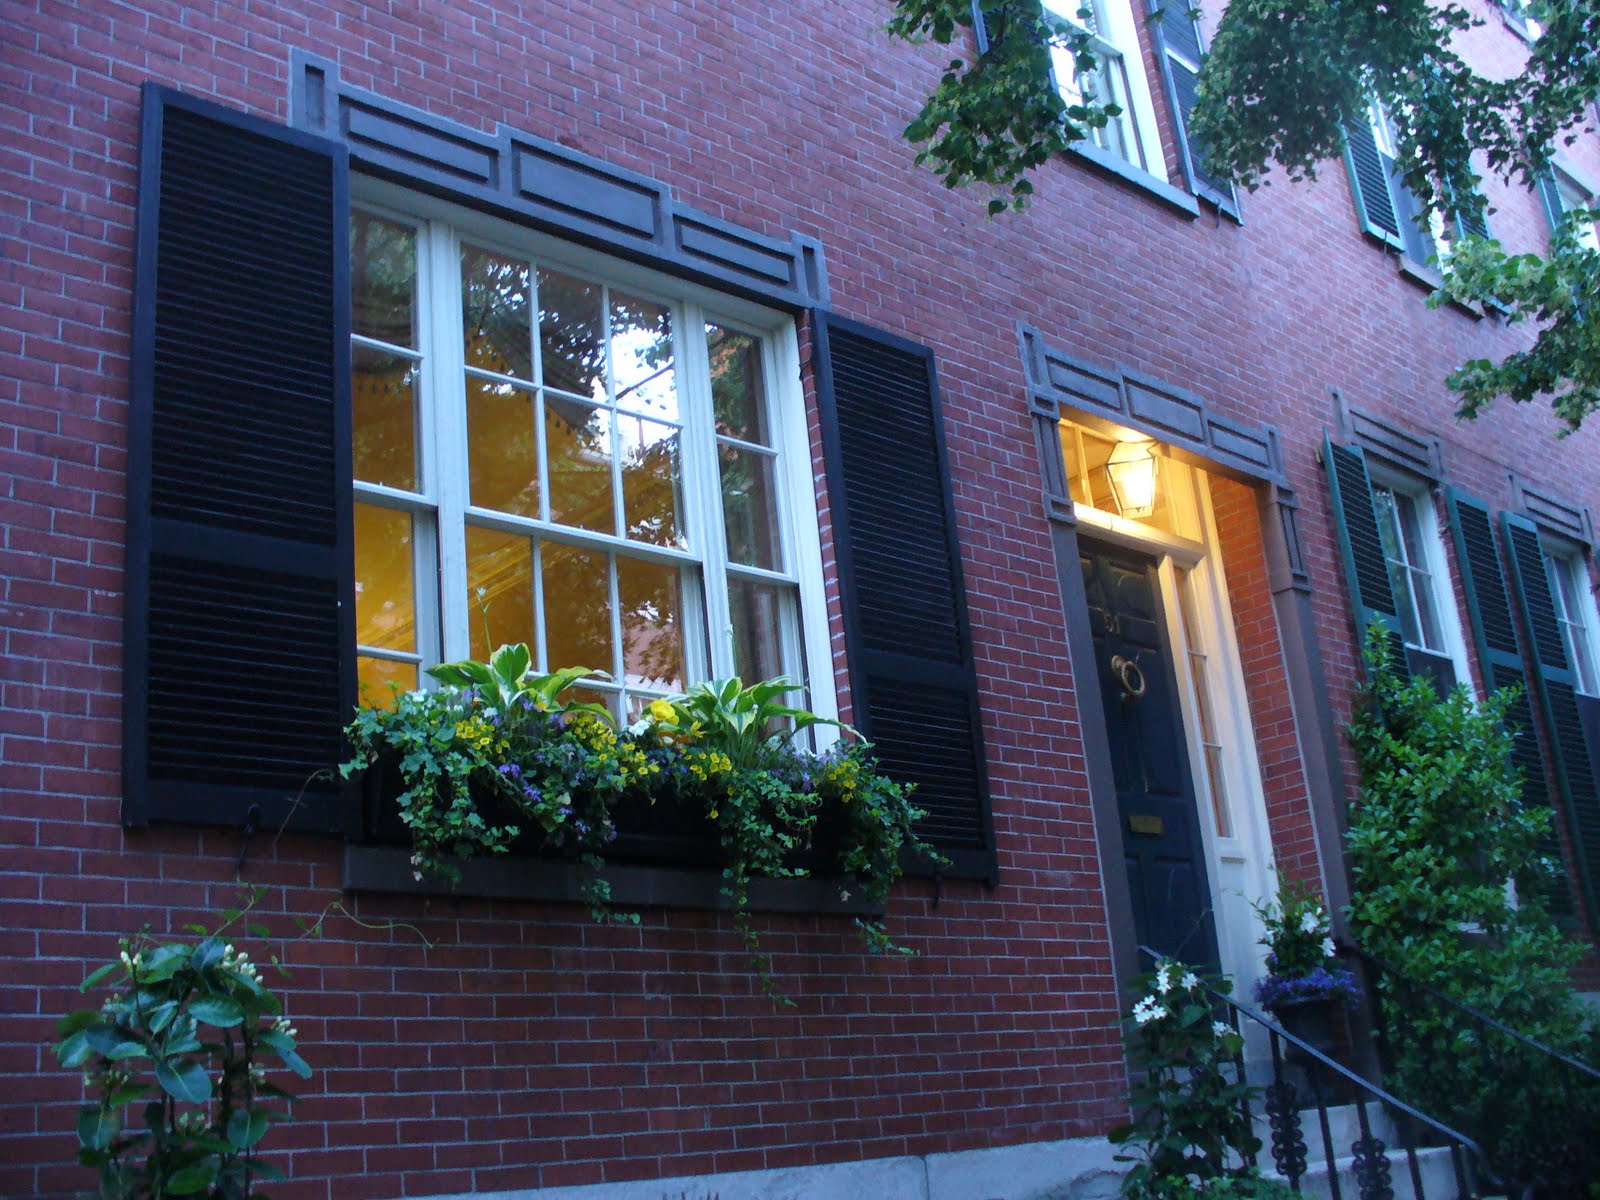 My Notting Hill: Beacon Hill Window Boxes, Planters & a Crushing Tree